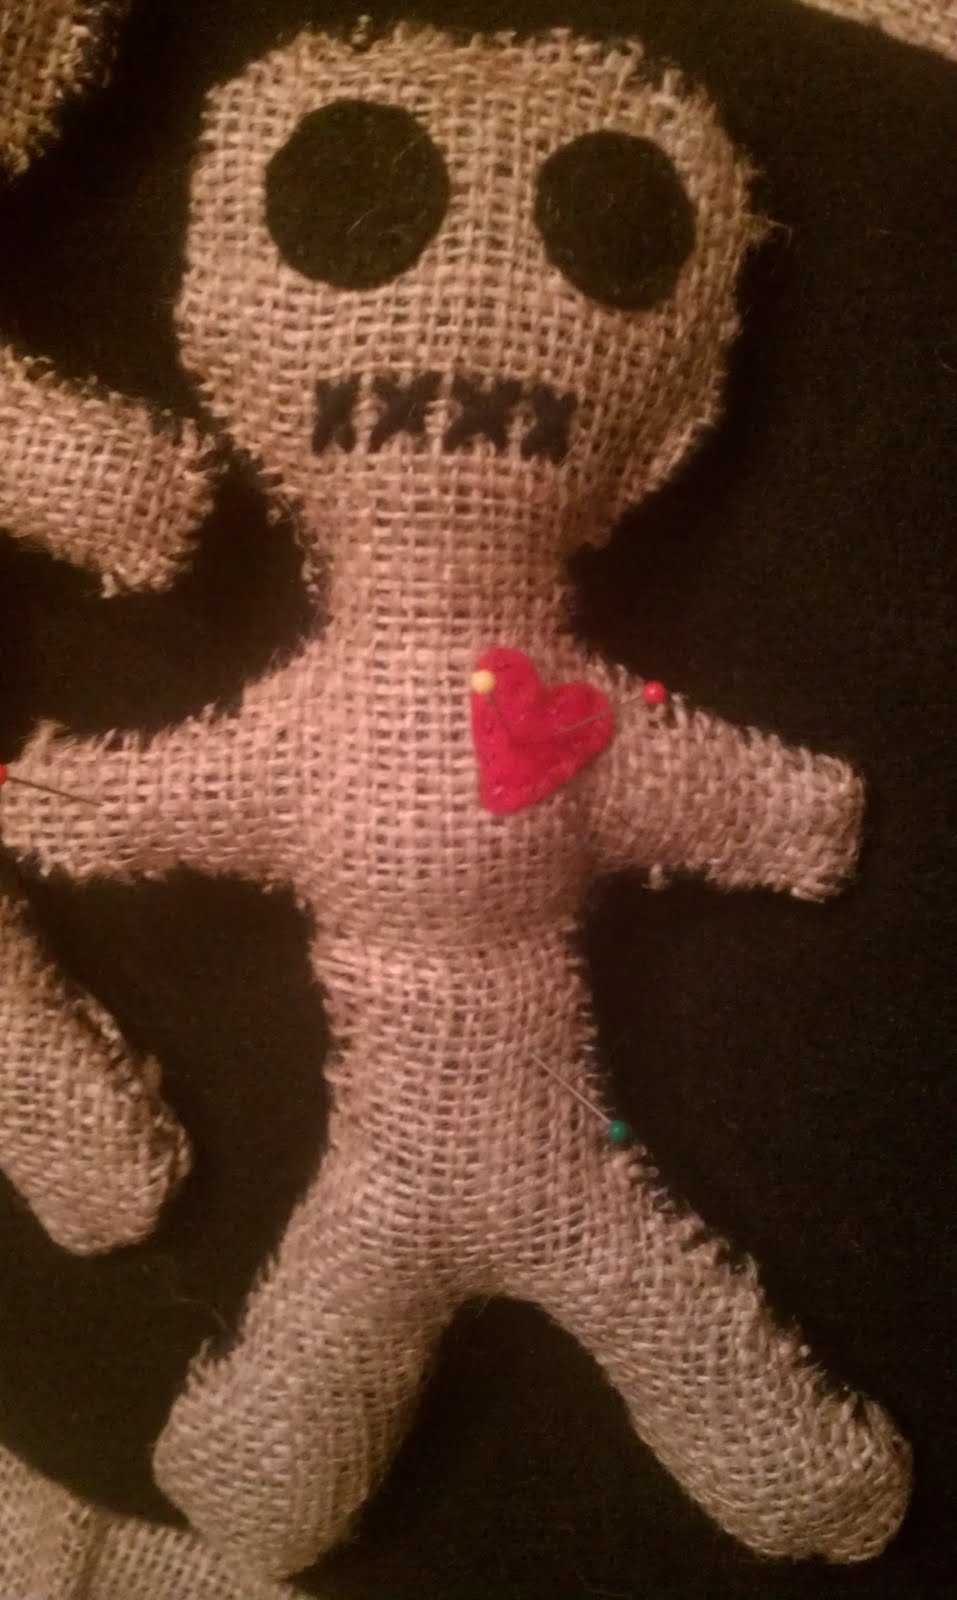 How To Make A Voodoo Doll At Home